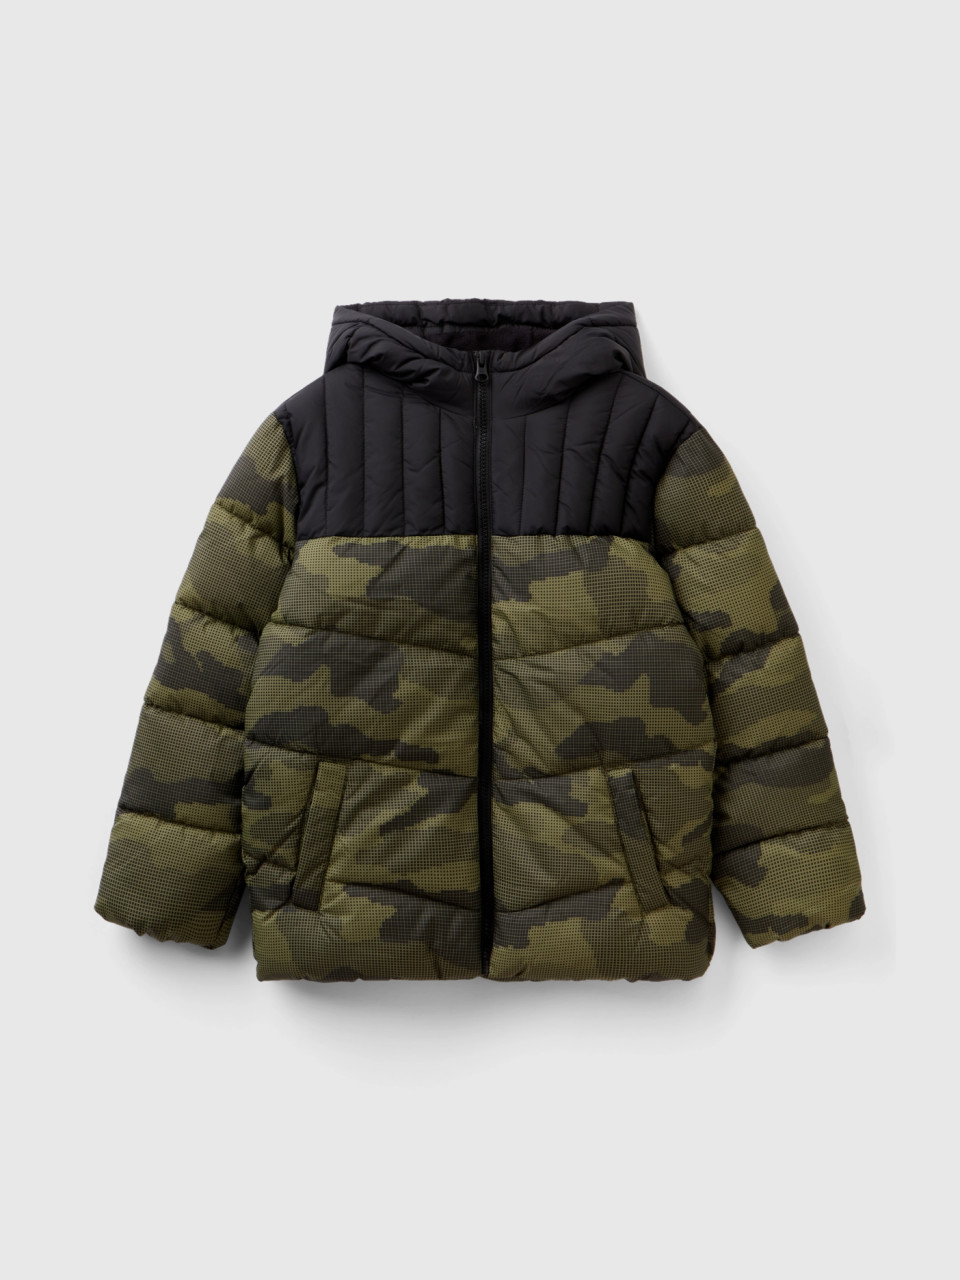 Benetton, Military Green Camouflage Padded Jacket, Military Green, Kids